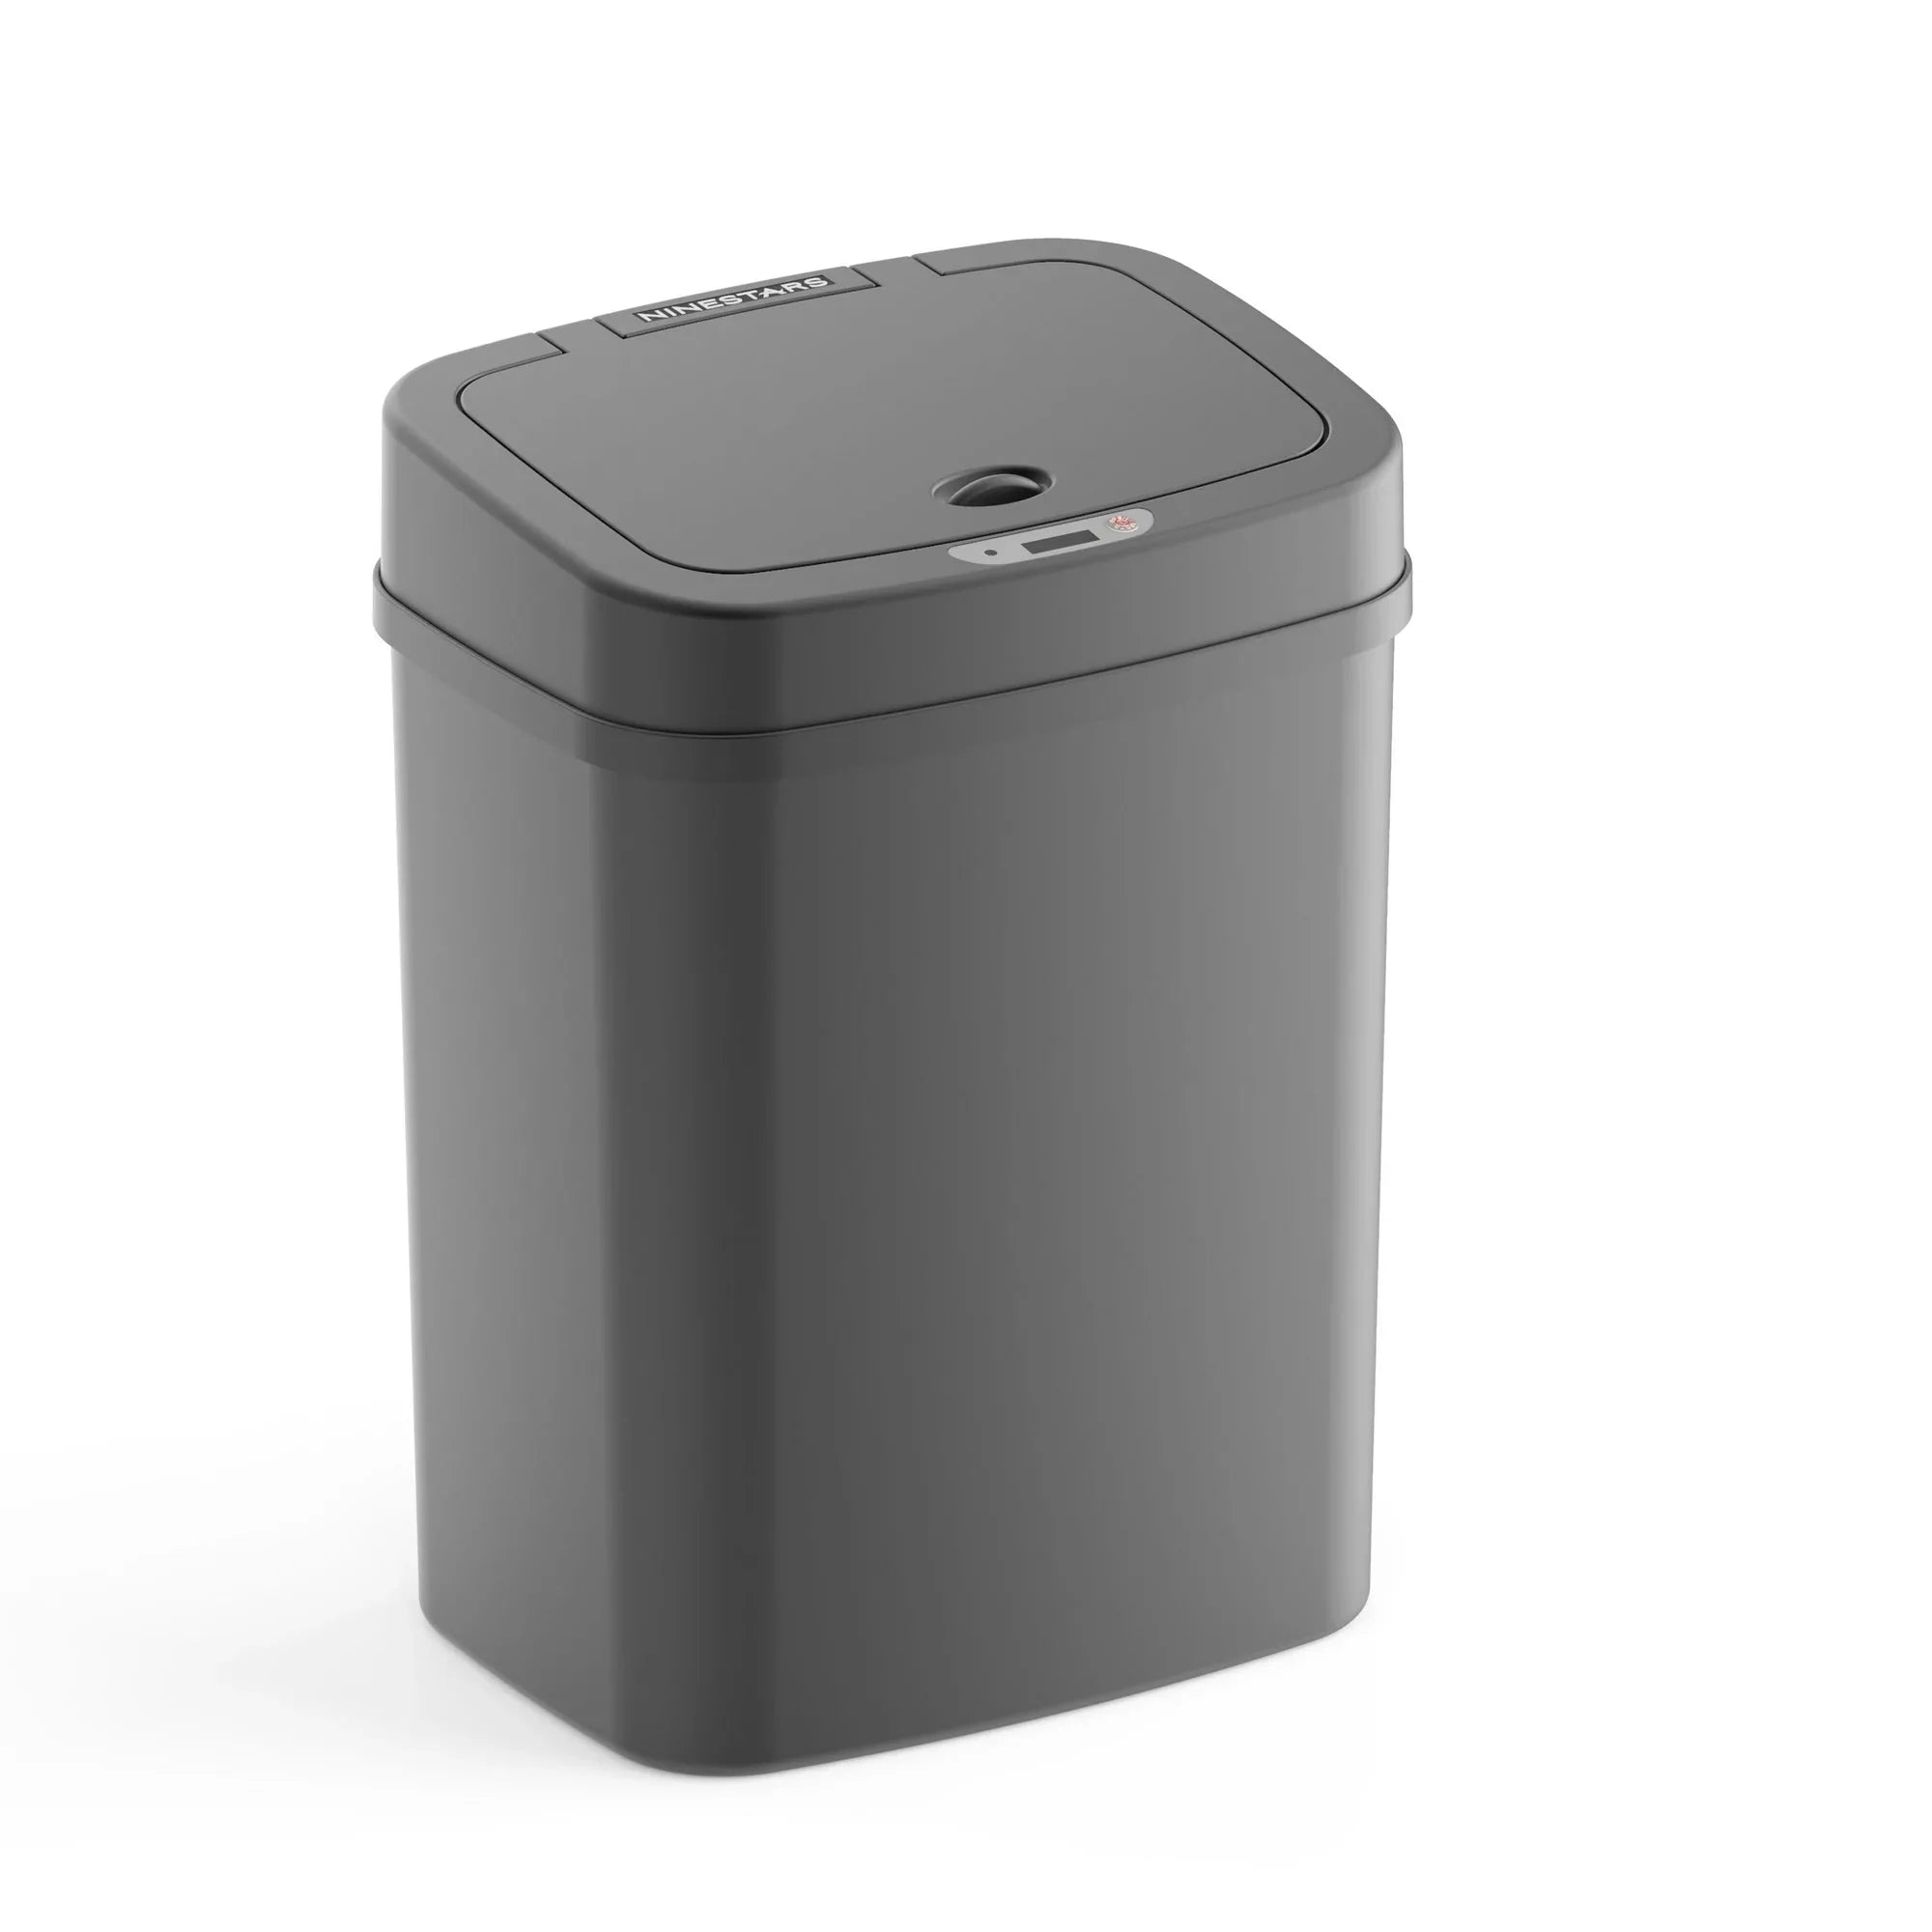 Wholesale prices with free shipping all over United States Nine Stars 3.2 Gallon Trash Can, Plastic Touchless Bathroom Trash Can, Black - Steven Deals